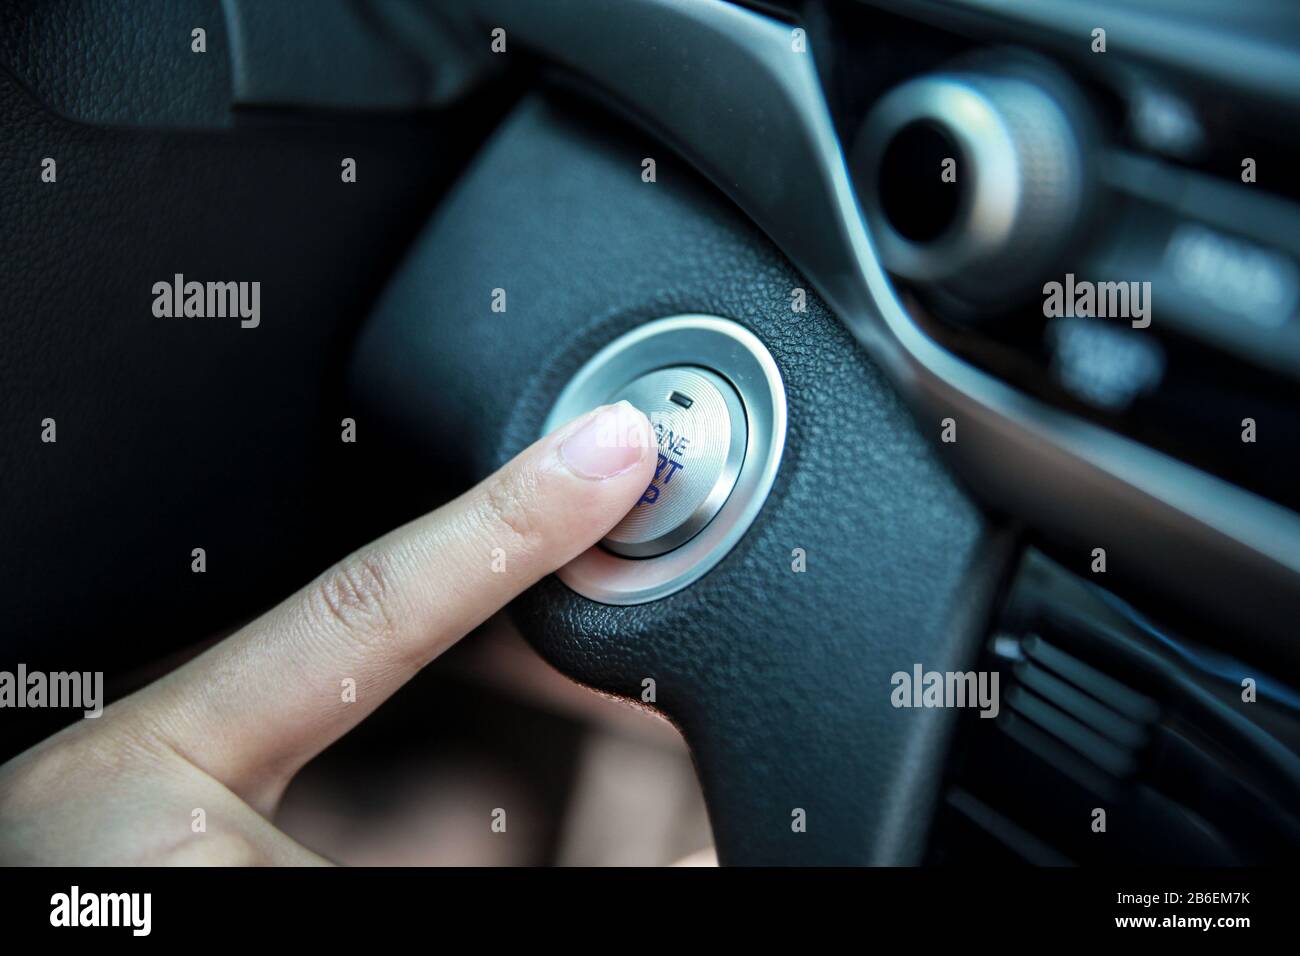 Hand pushing a car engine's Start and stop button Stock Photo